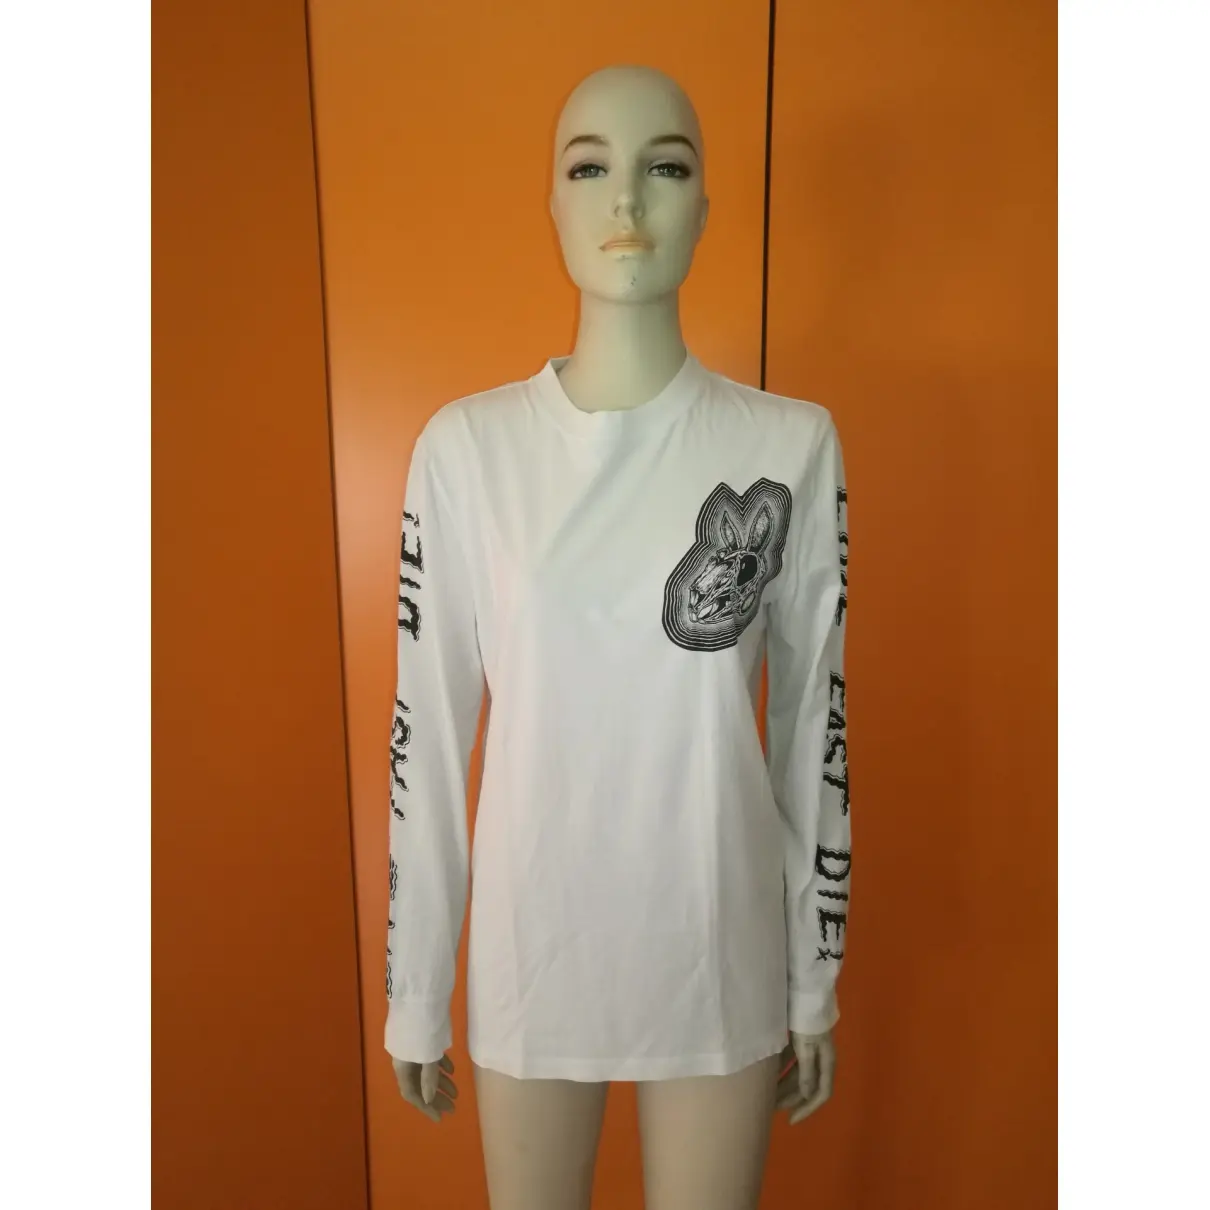 Mcq T-shirt for sale